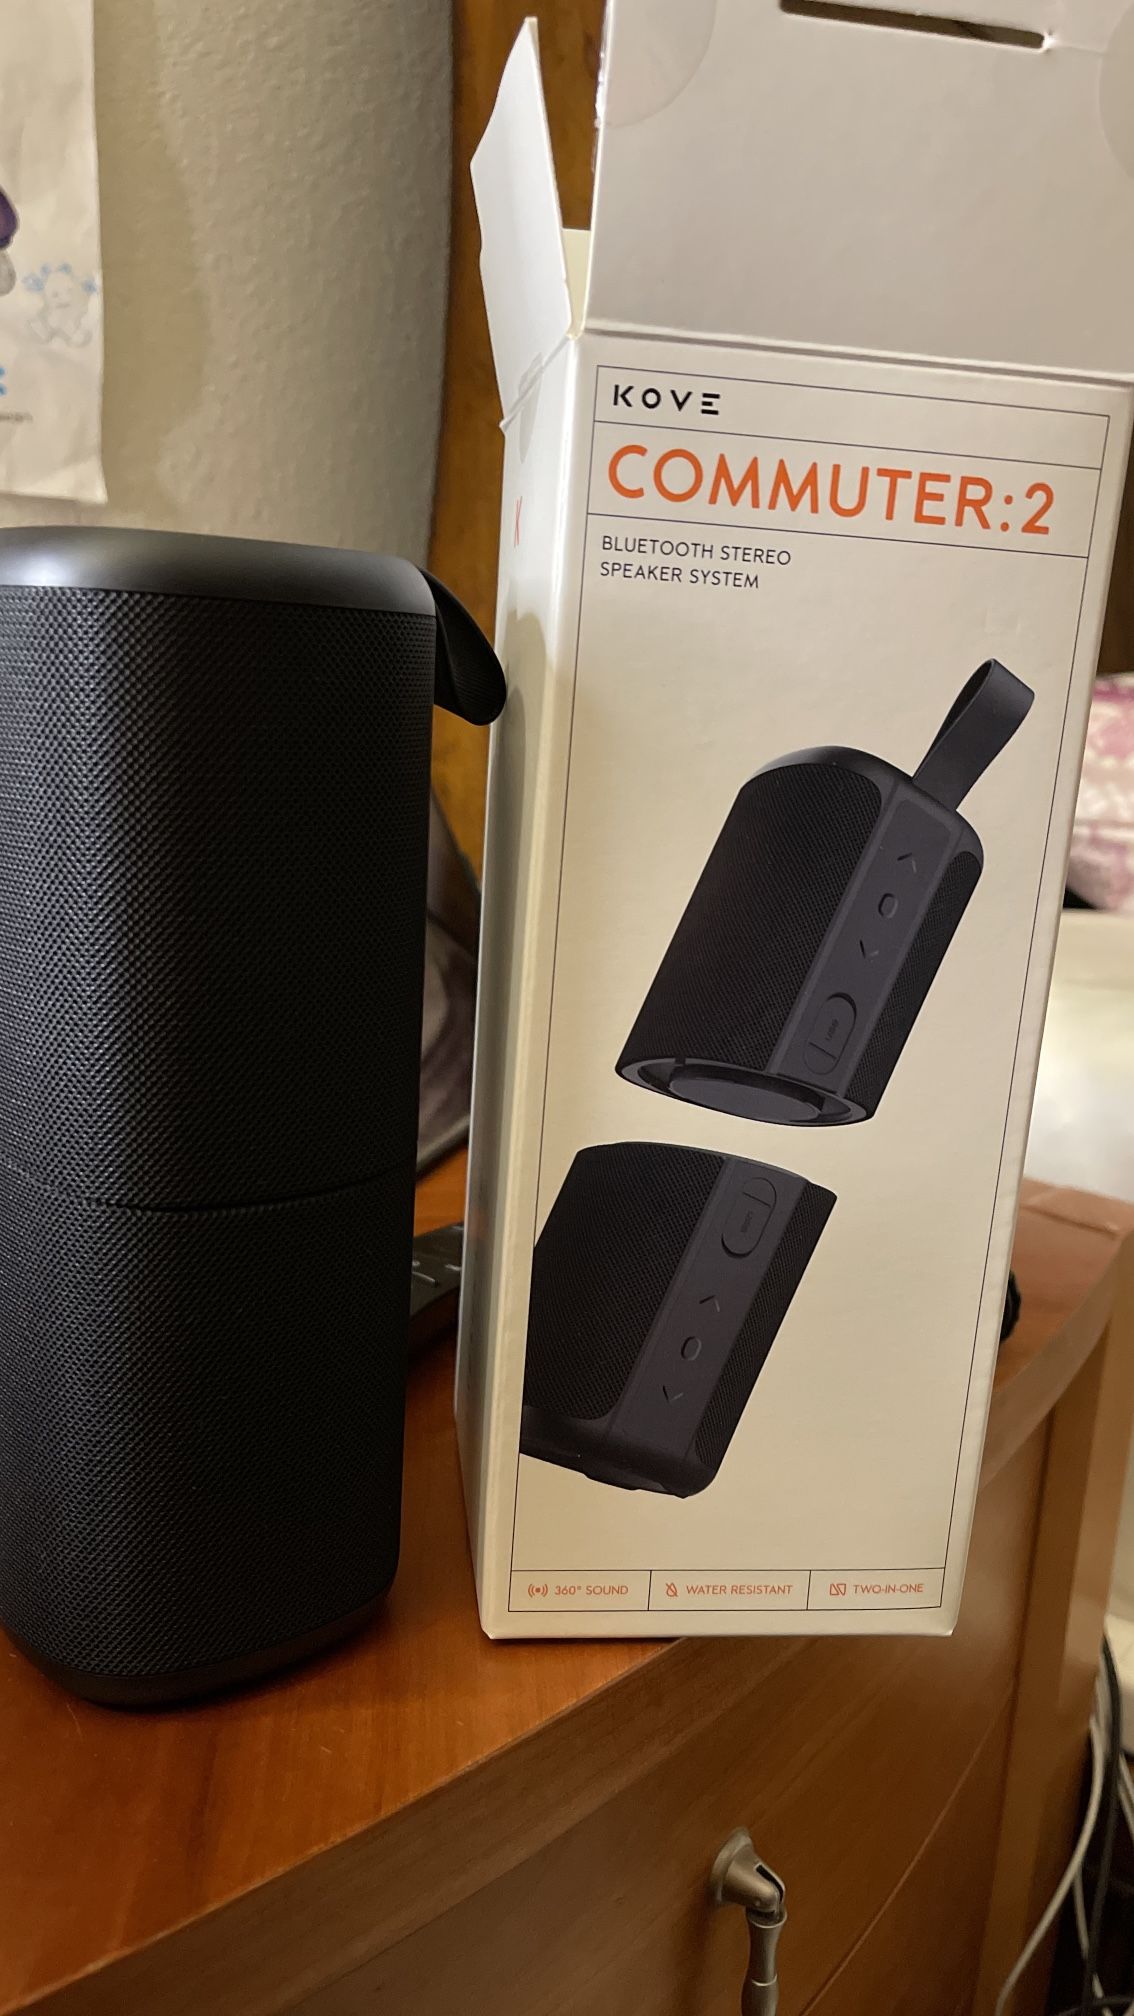 Kove Commuter 2 Bluetooth Stereo Speakers System